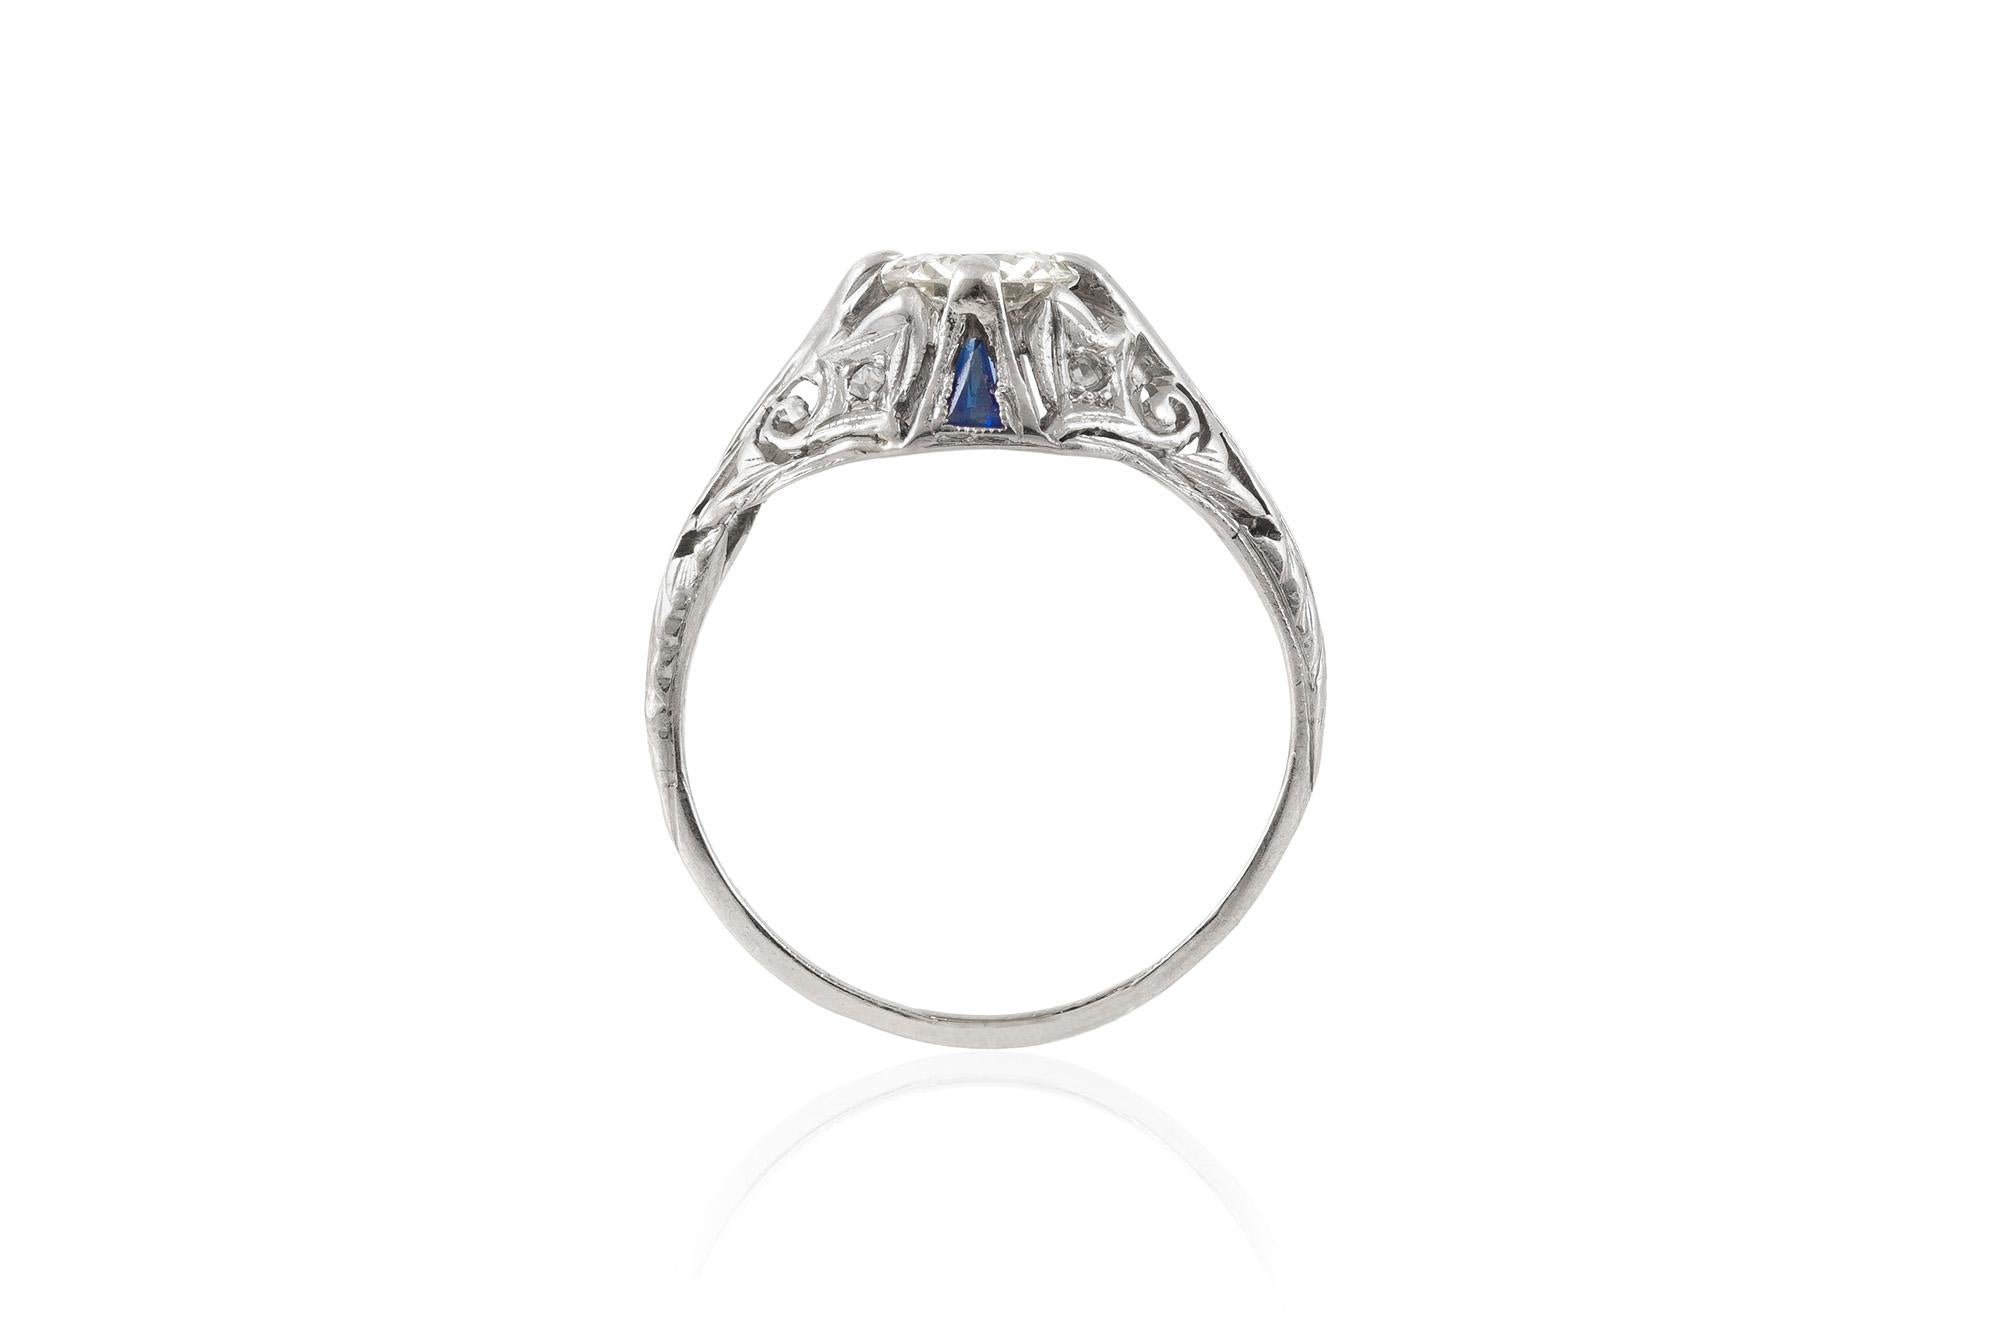 The beautiful ring is finely crafted in platinum with filigree. The center diamond weighs approximately a total of 0.67 carat. The ring features sapphires on the side.
Circa 1920.